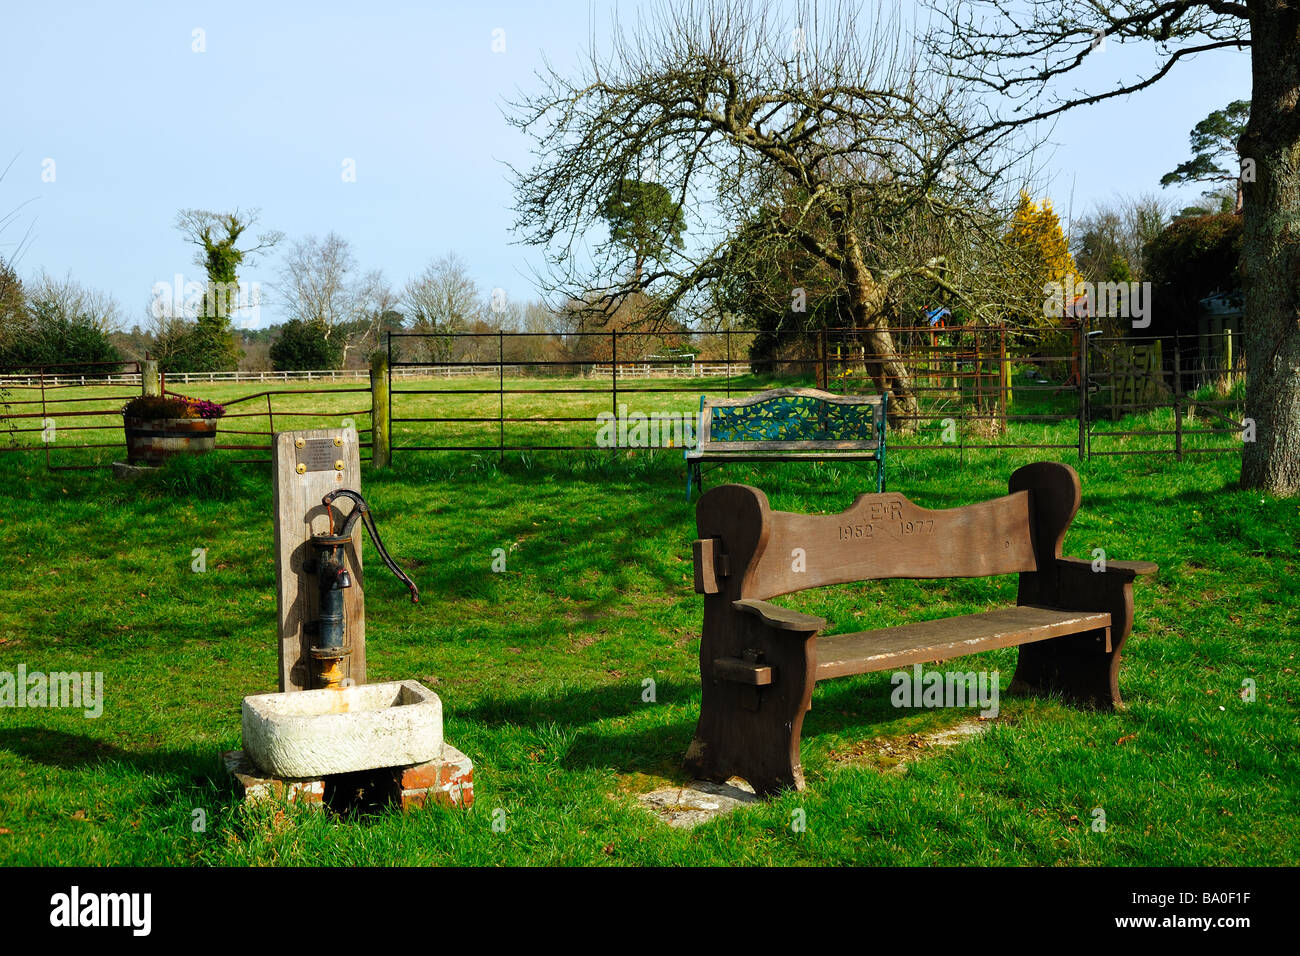 EAST HOLME, DORSET, UK - MARCH 16, 2009:  Silver Jubilee Commemorative Bench and Hand Pump Stock Photo